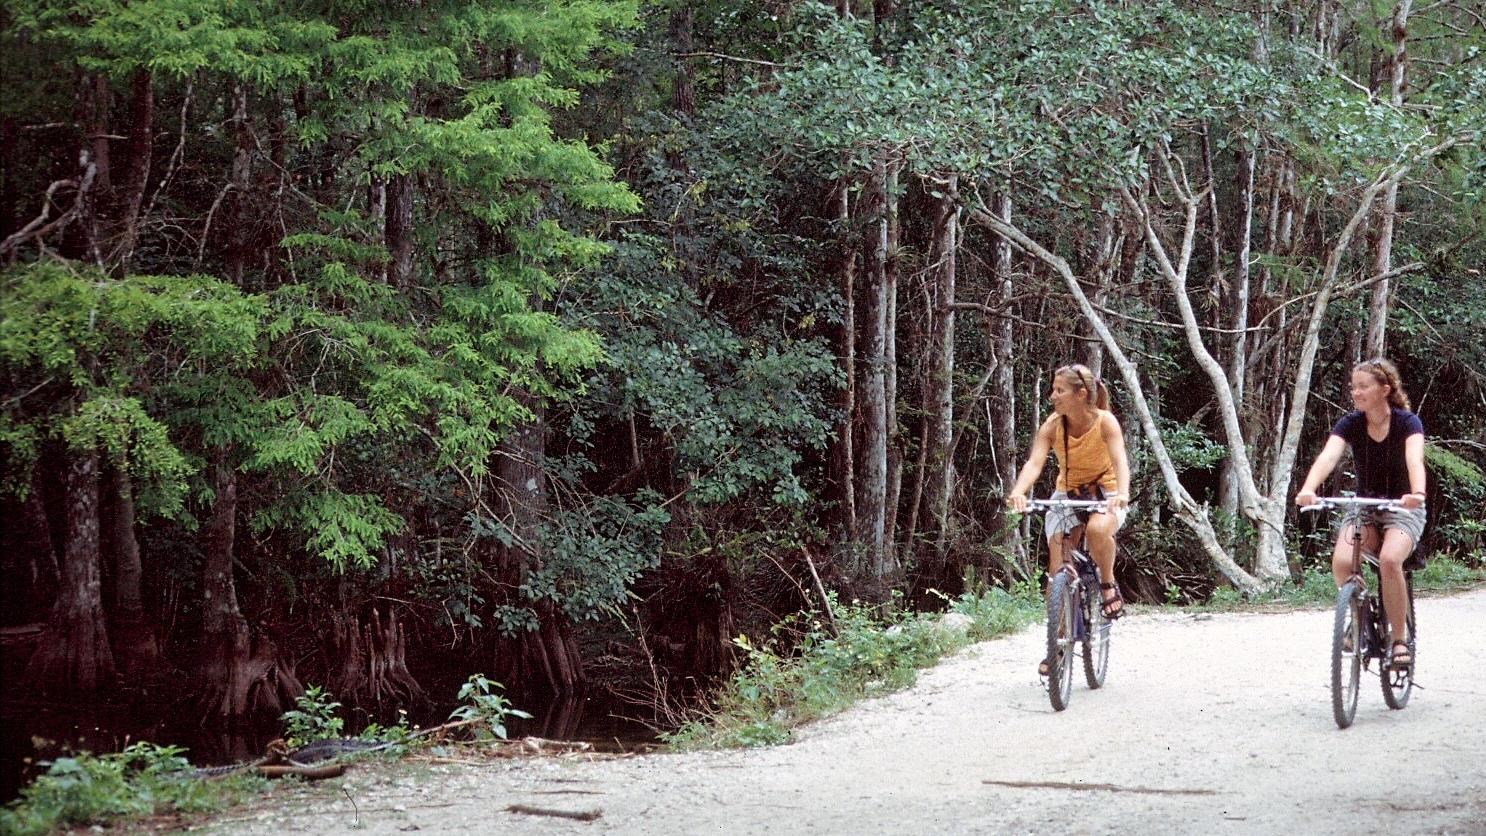 Two people ride bikes on a dirt road in a cypress swamp